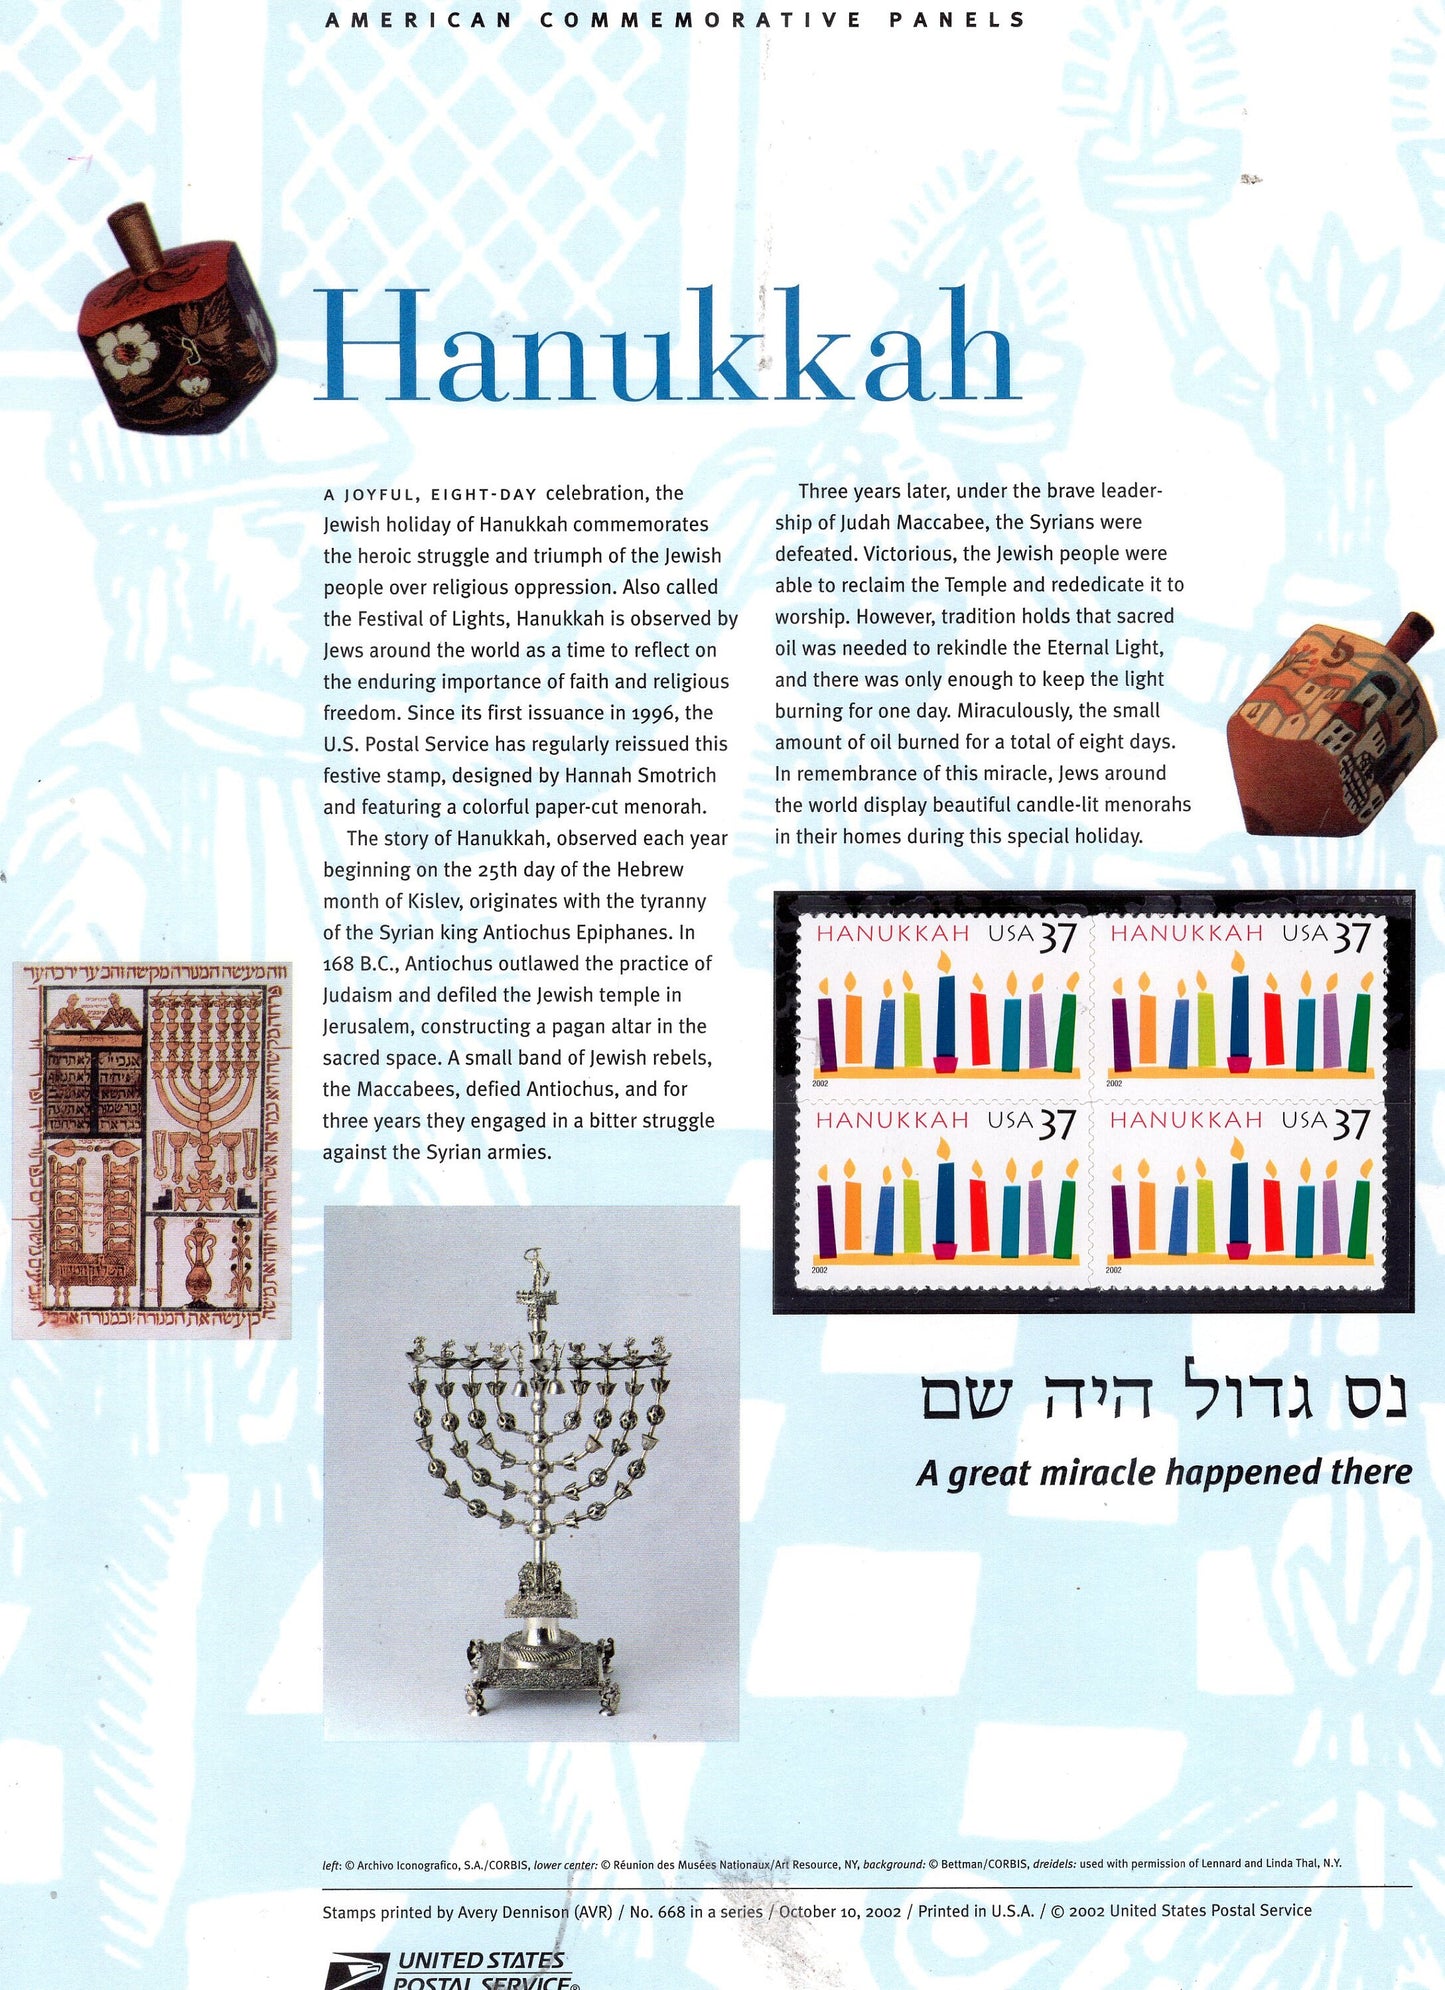 HANUKKAH MENORAH JEWISH Commemorative Panel with a Block of 4 Stamps Illustrations plus Text – A Great Gift 8.5x11 - Issued in 2002 s668 -